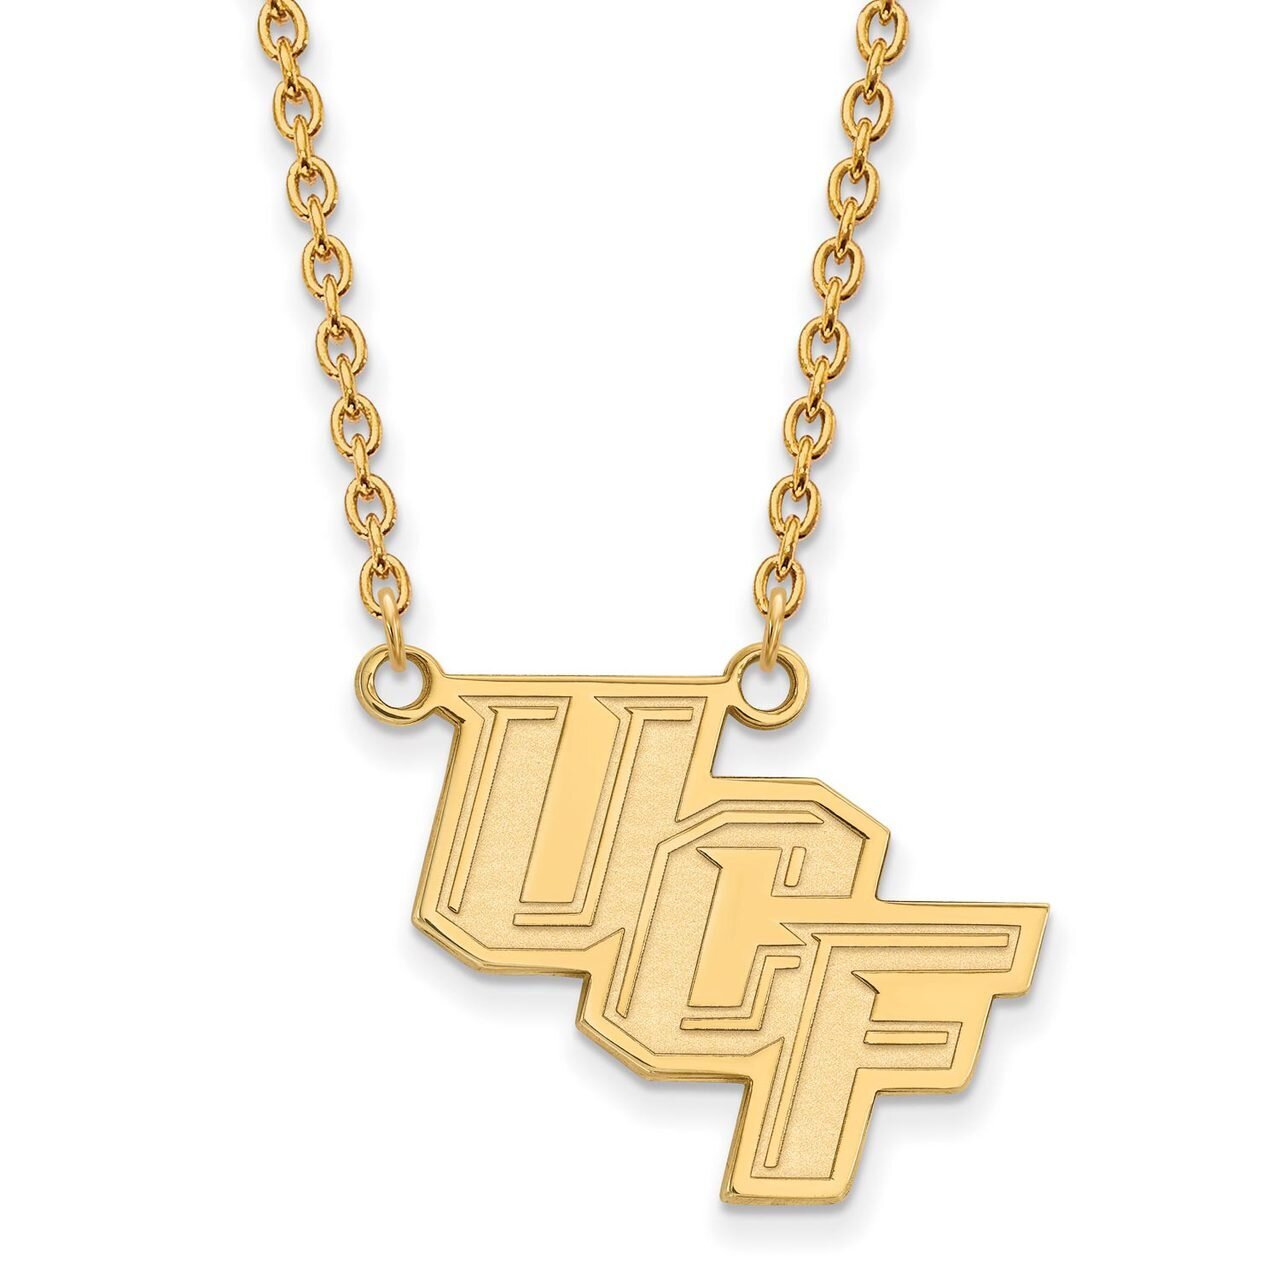 University of Central Florida Large Pendant with Chain Necklace 14k Yellow Gold 4Y012UCF-18